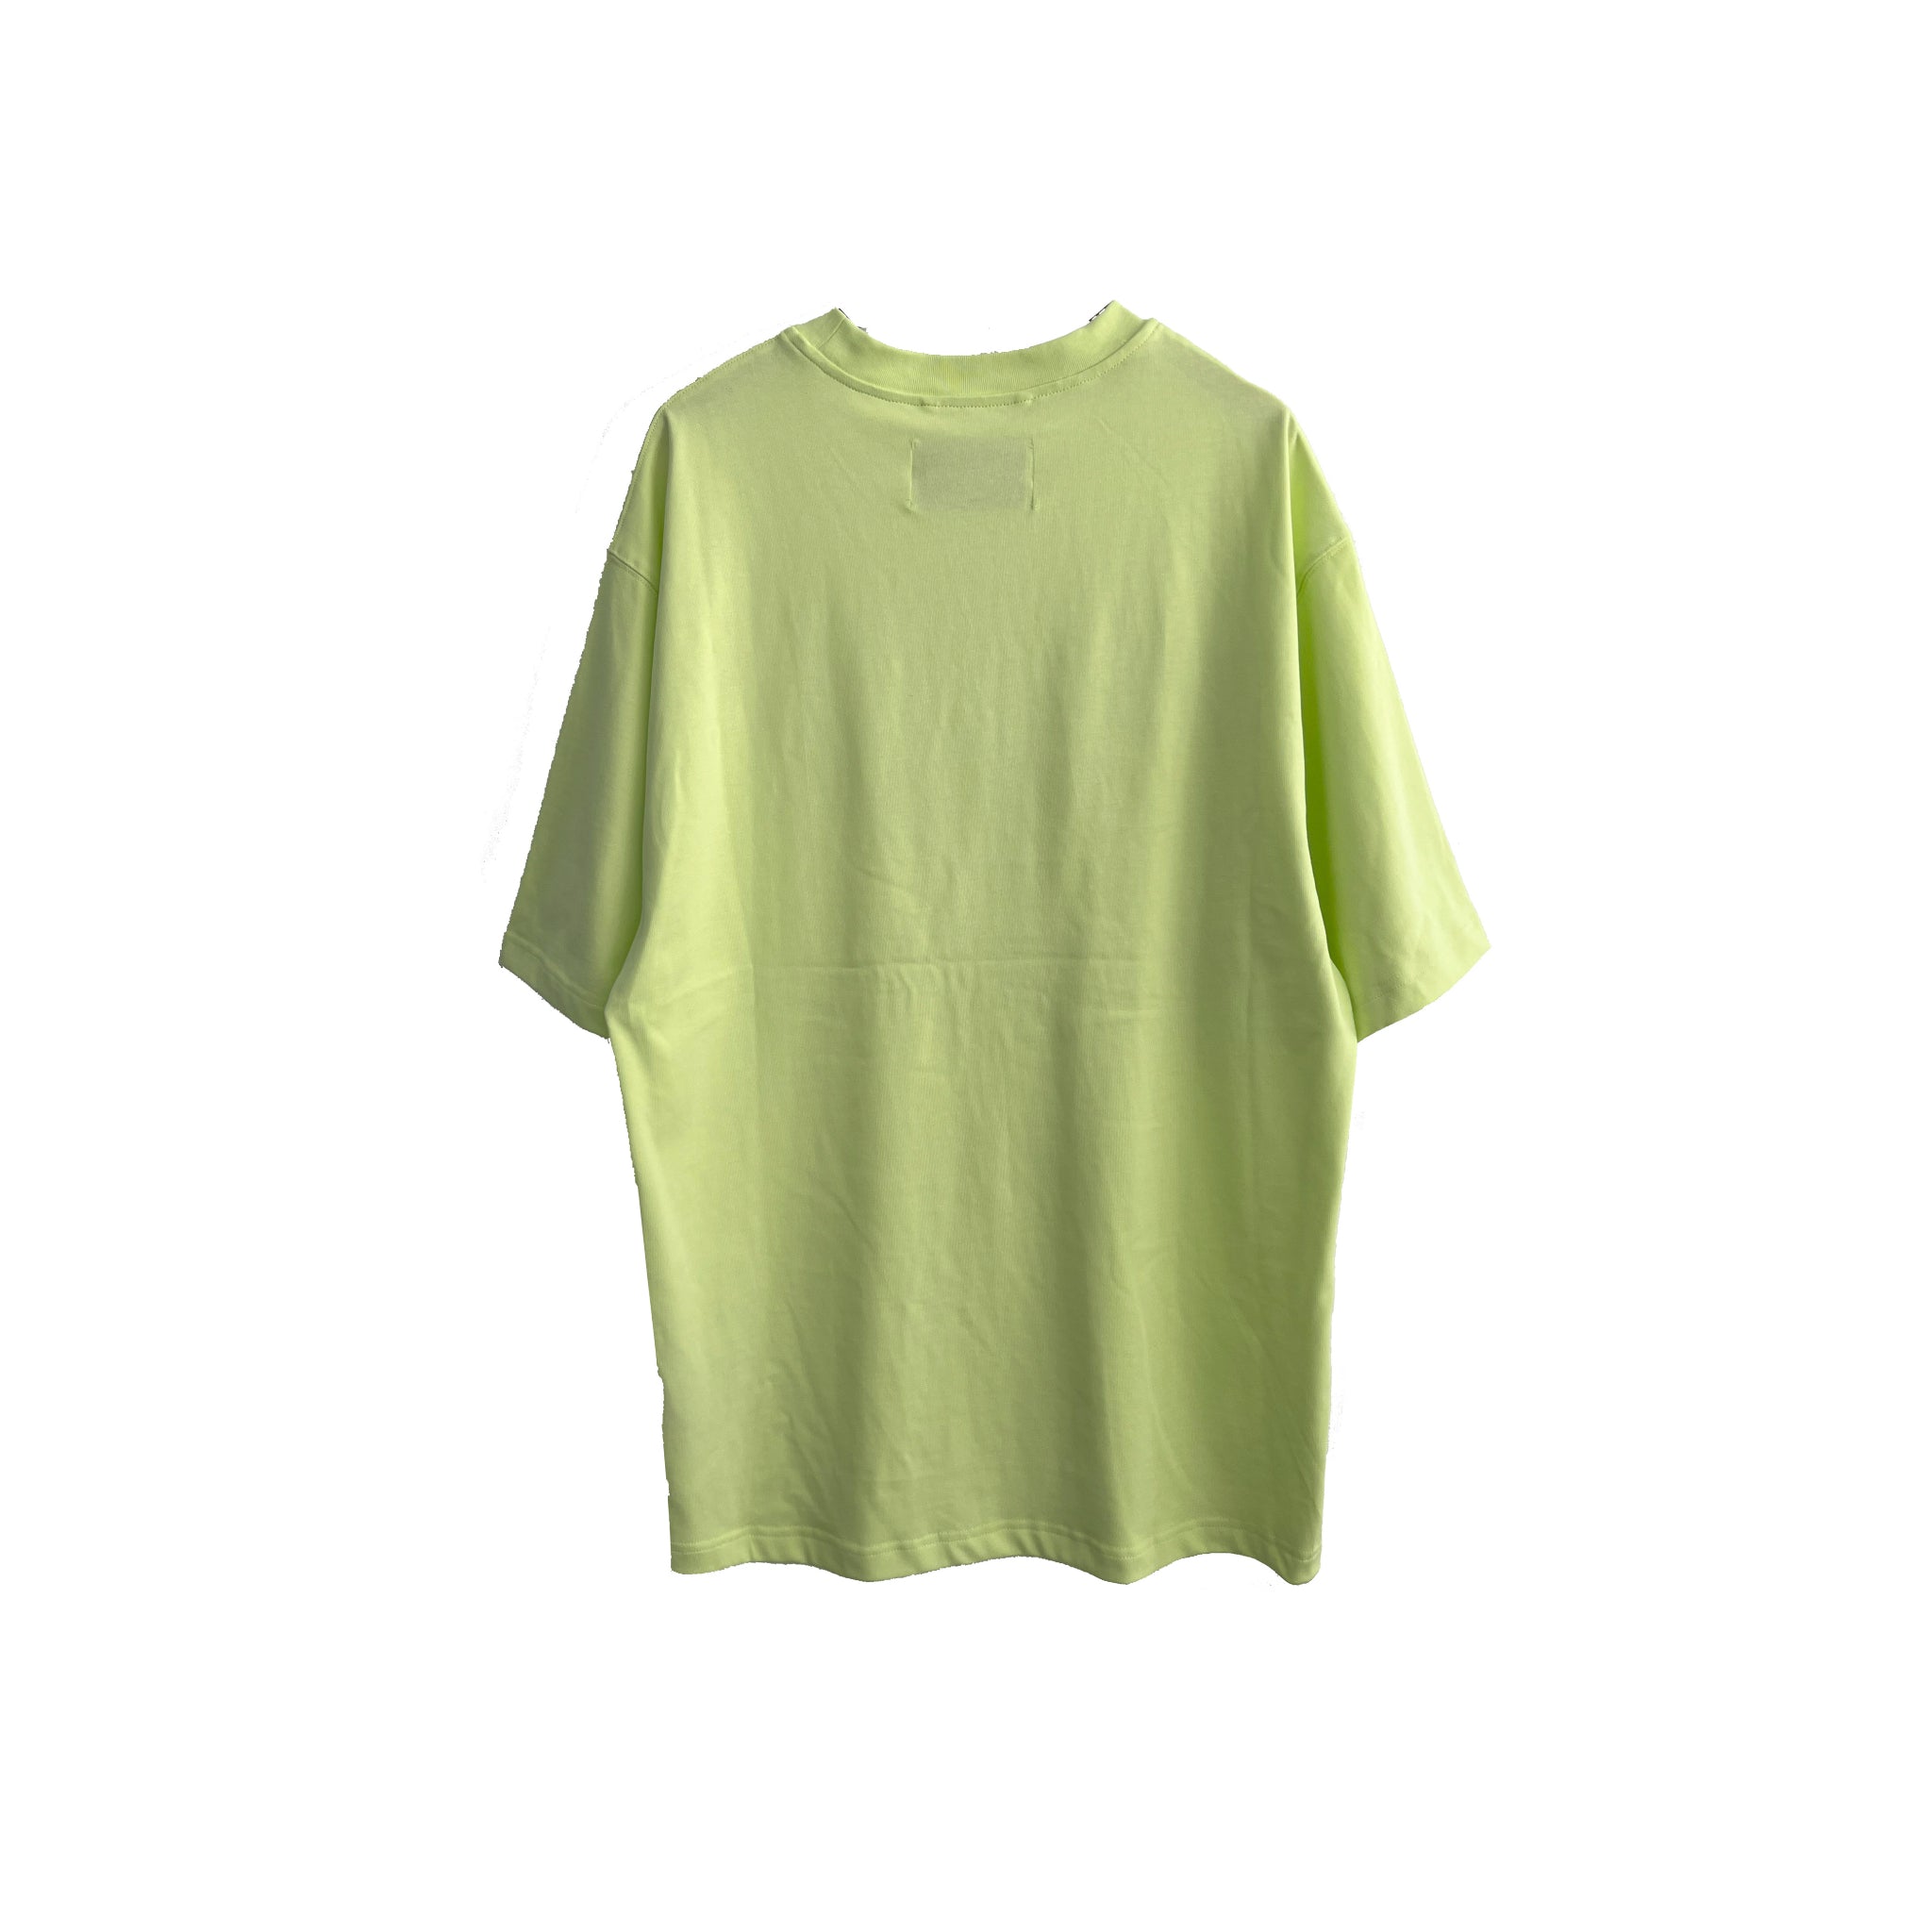 VANN VALRENCÉ Green "Five Cities Linkage" Limited Compassion T-shirt | MADA IN CHINA